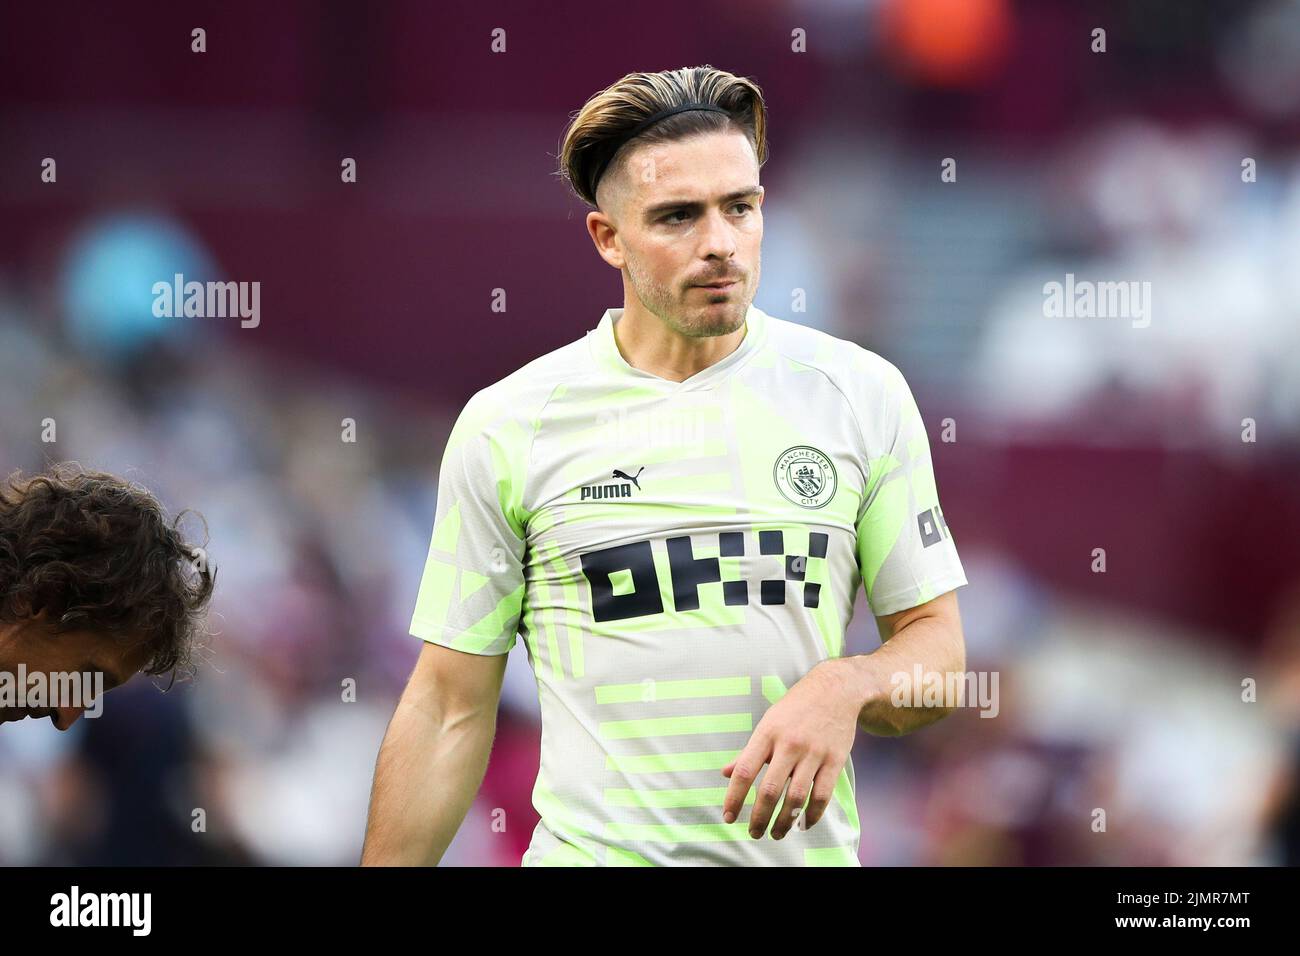 London, UK. 7th August, 2022. Jack Grealish of Manchester City warms up during the Premier League match between West Ham United and Manchester City at the London Stadium, Stratford on Sunday 7th August 2022. (Credit: Tom West | MI News) Credit: MI News & Sport /Alamy Live News Stock Photo